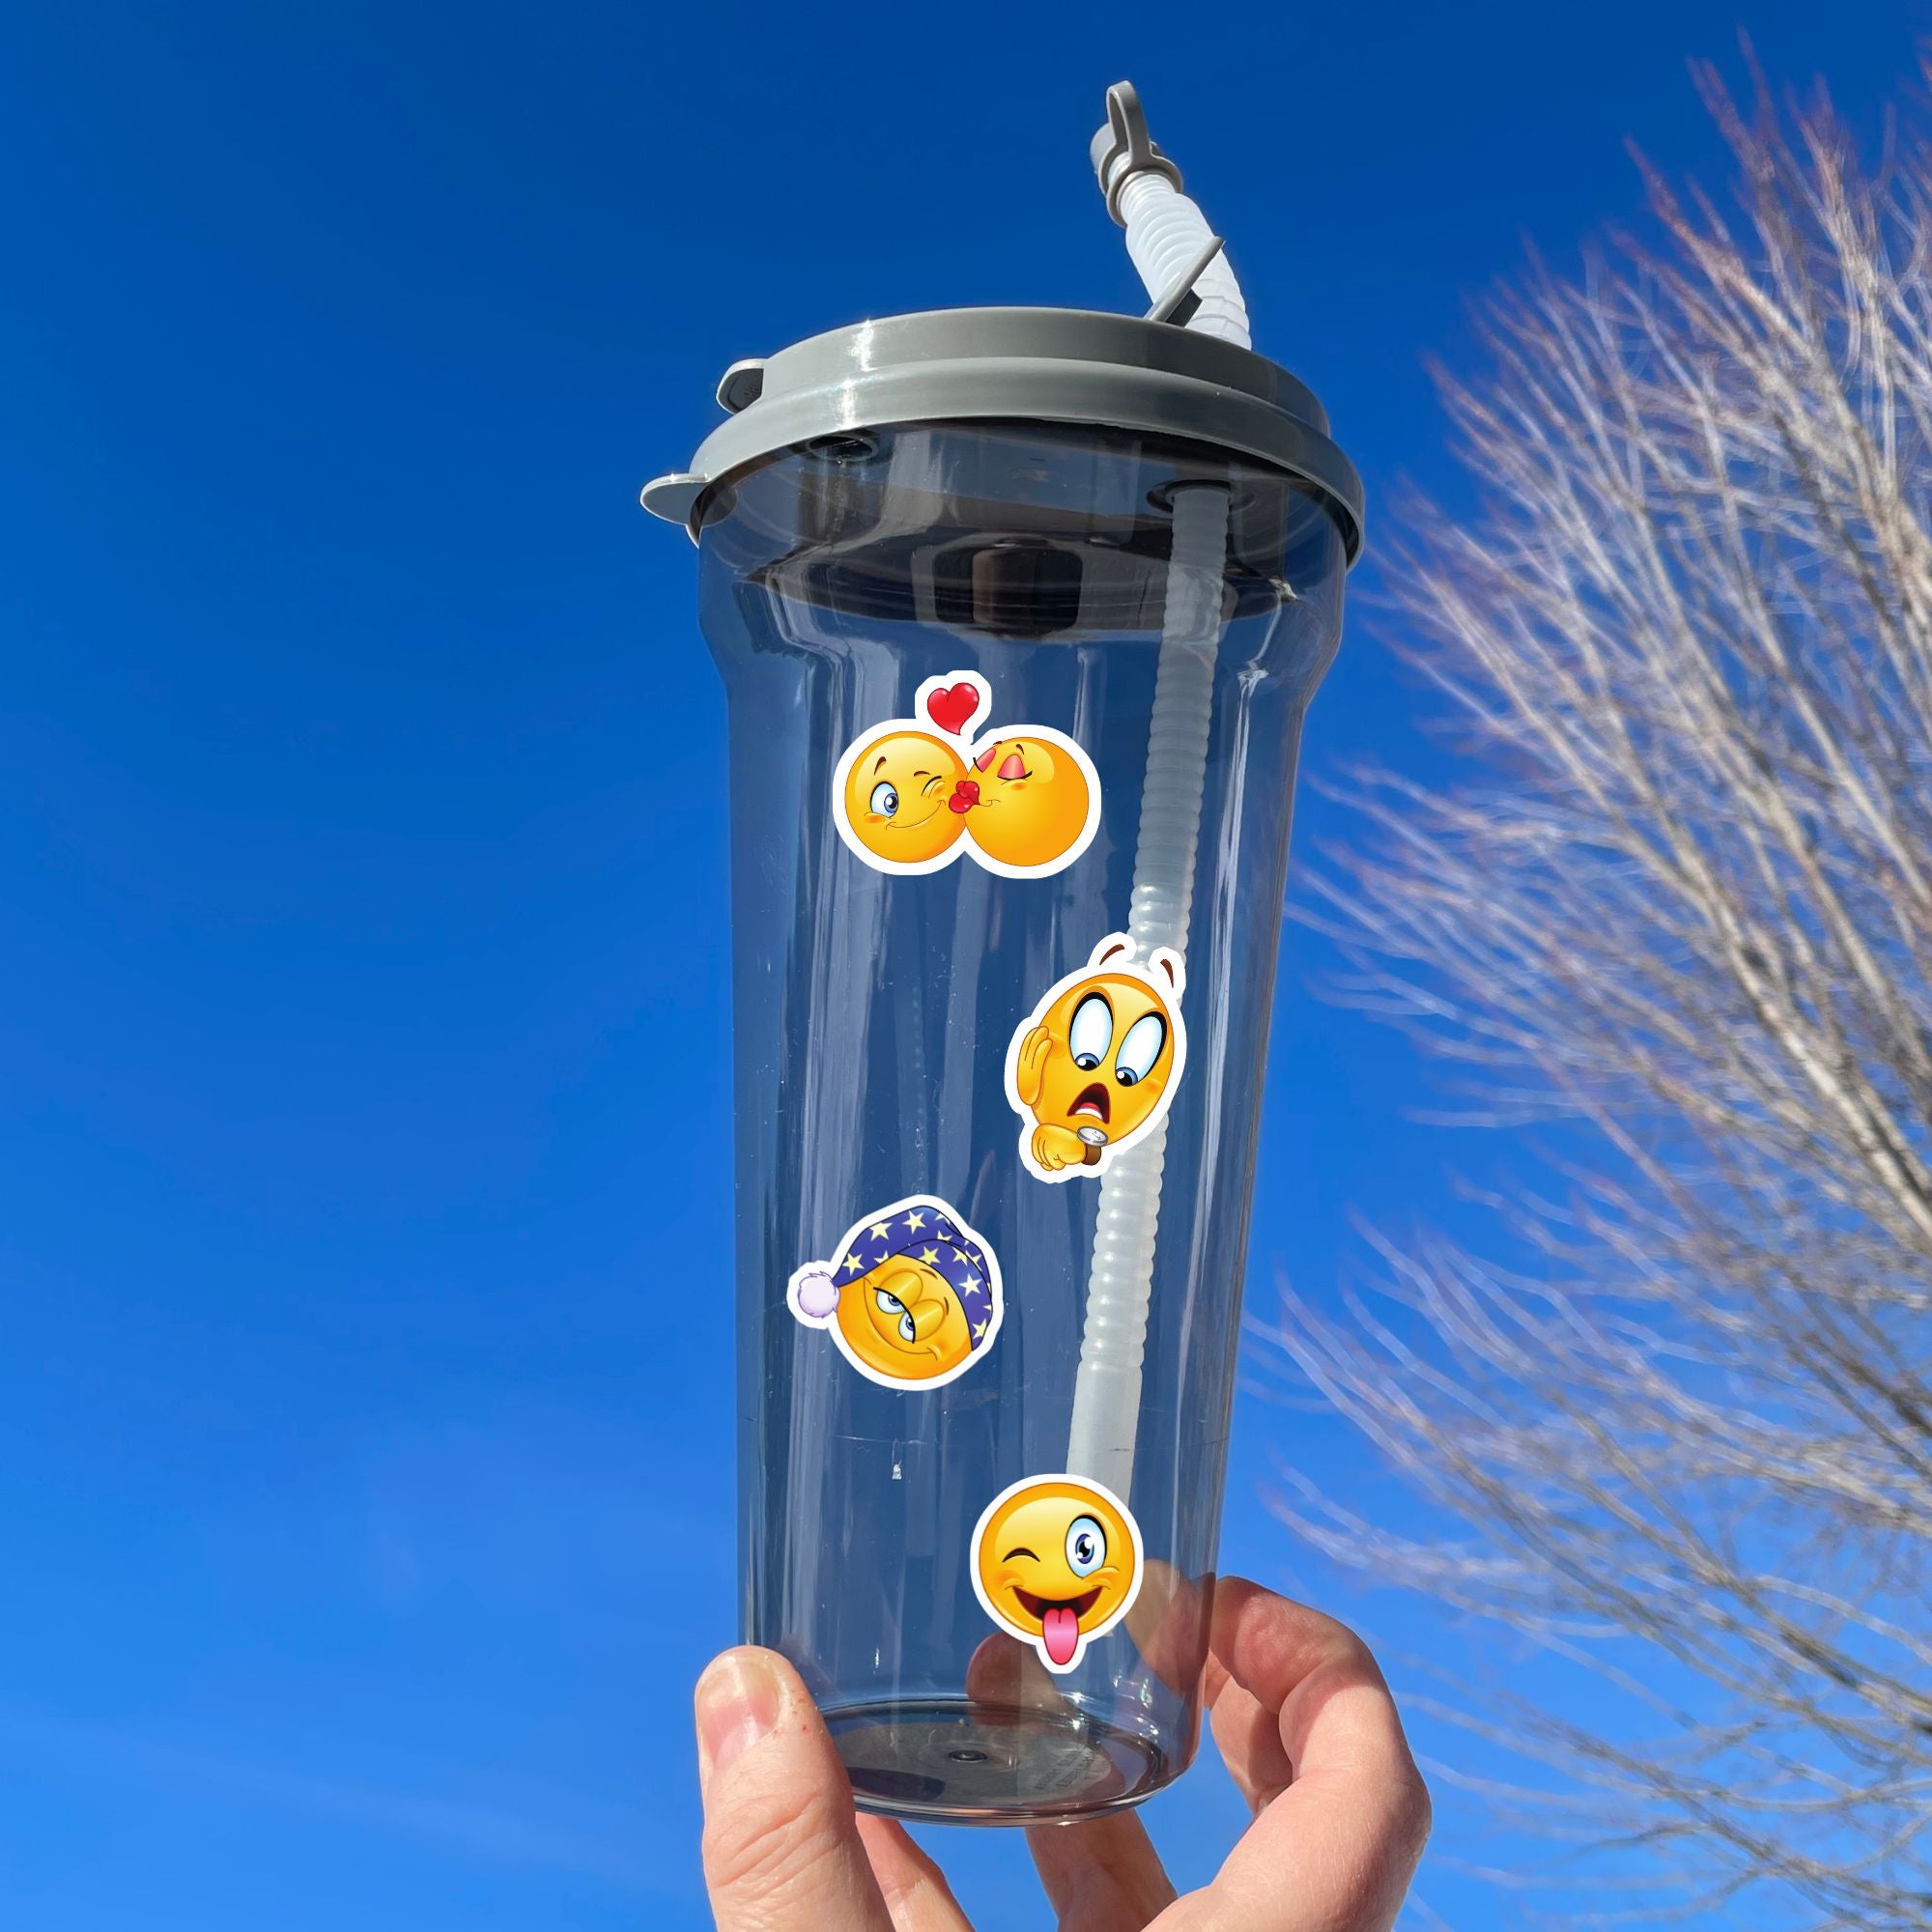 This sticker sheet features all your favorite smiley emojis! It's enough to make anyone smile! This image shows a water bottle with smiley faces kissing, a shocked smiley face looking at their watch, a sleepy smiley face, and a smiley face with their tongue hanging out.